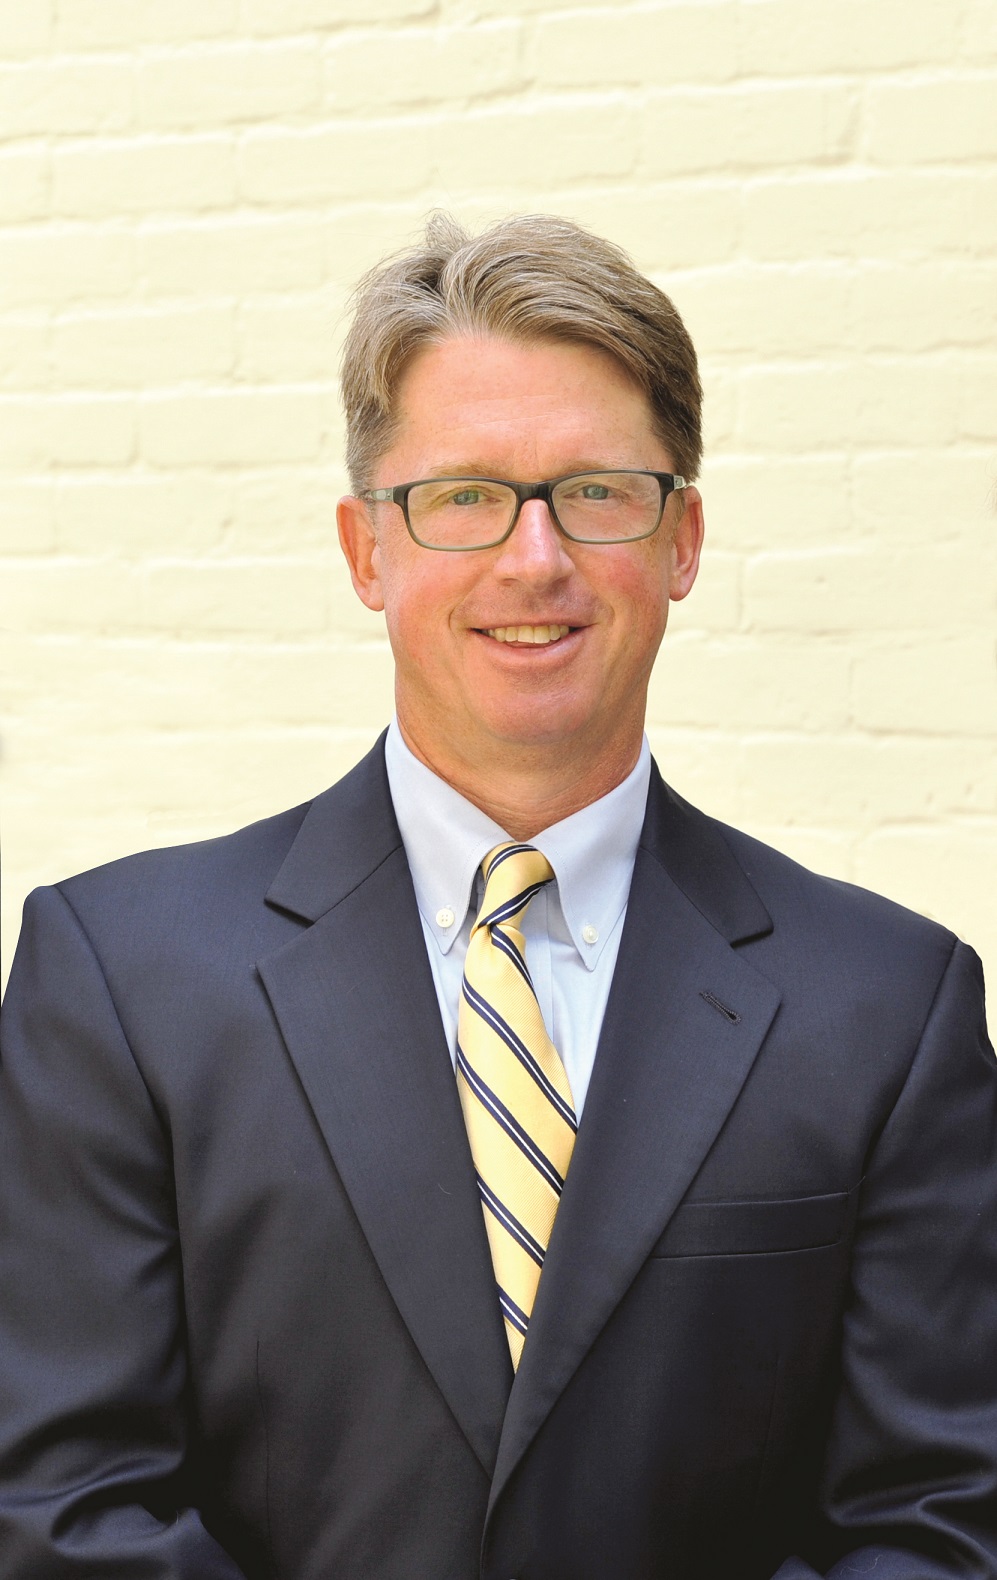 Jim Reed is managing partner of the Ziff Law Firm.